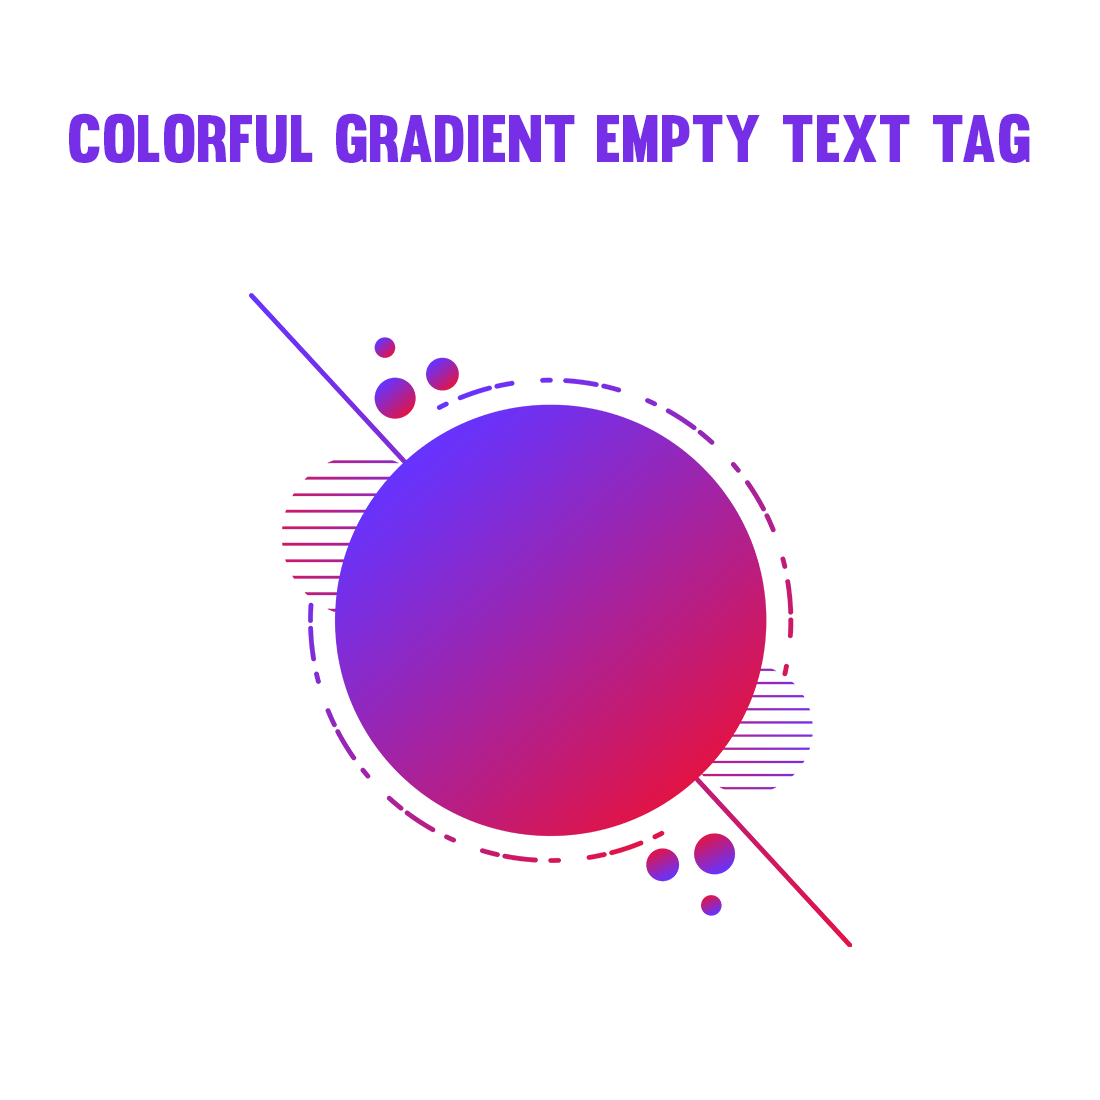 Colorful Gradient Empty Text Tag Free Editable Vector Template cover image.